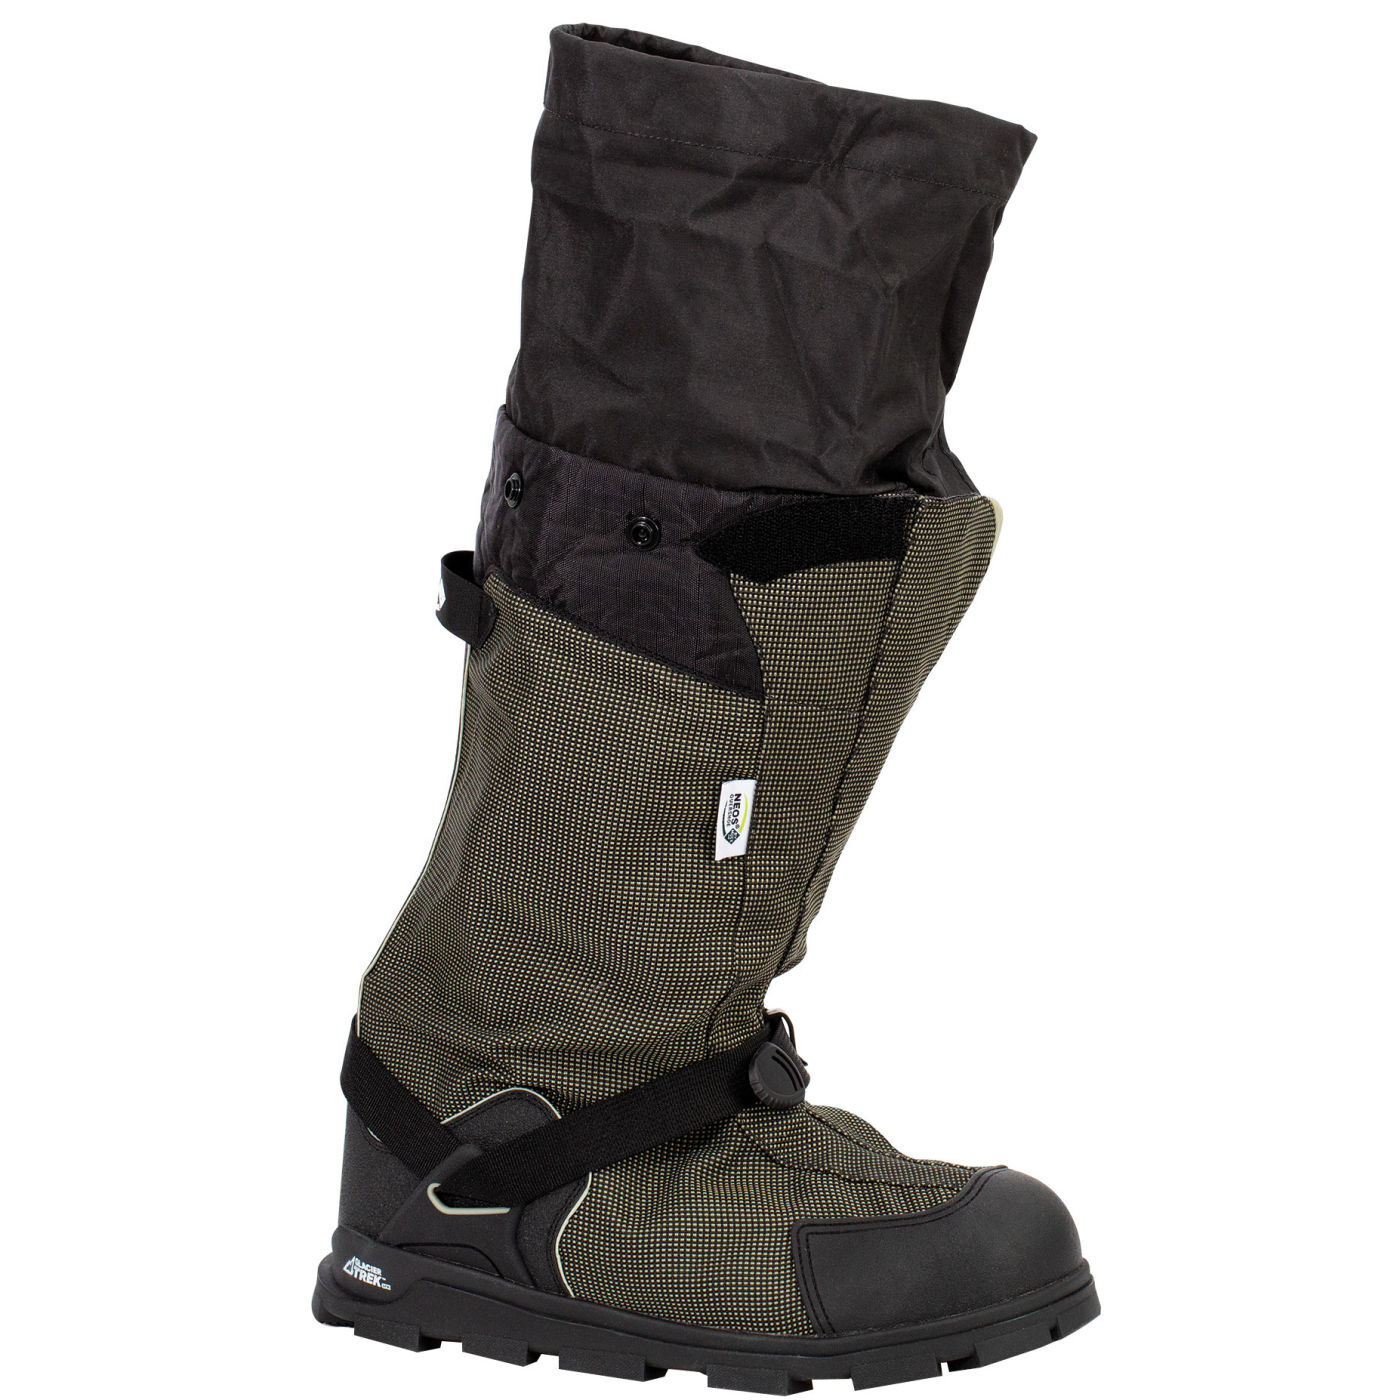 NEOS Navigator Glacier Trek SPK Insulated Overshoe + Cleats from Columbia Safety